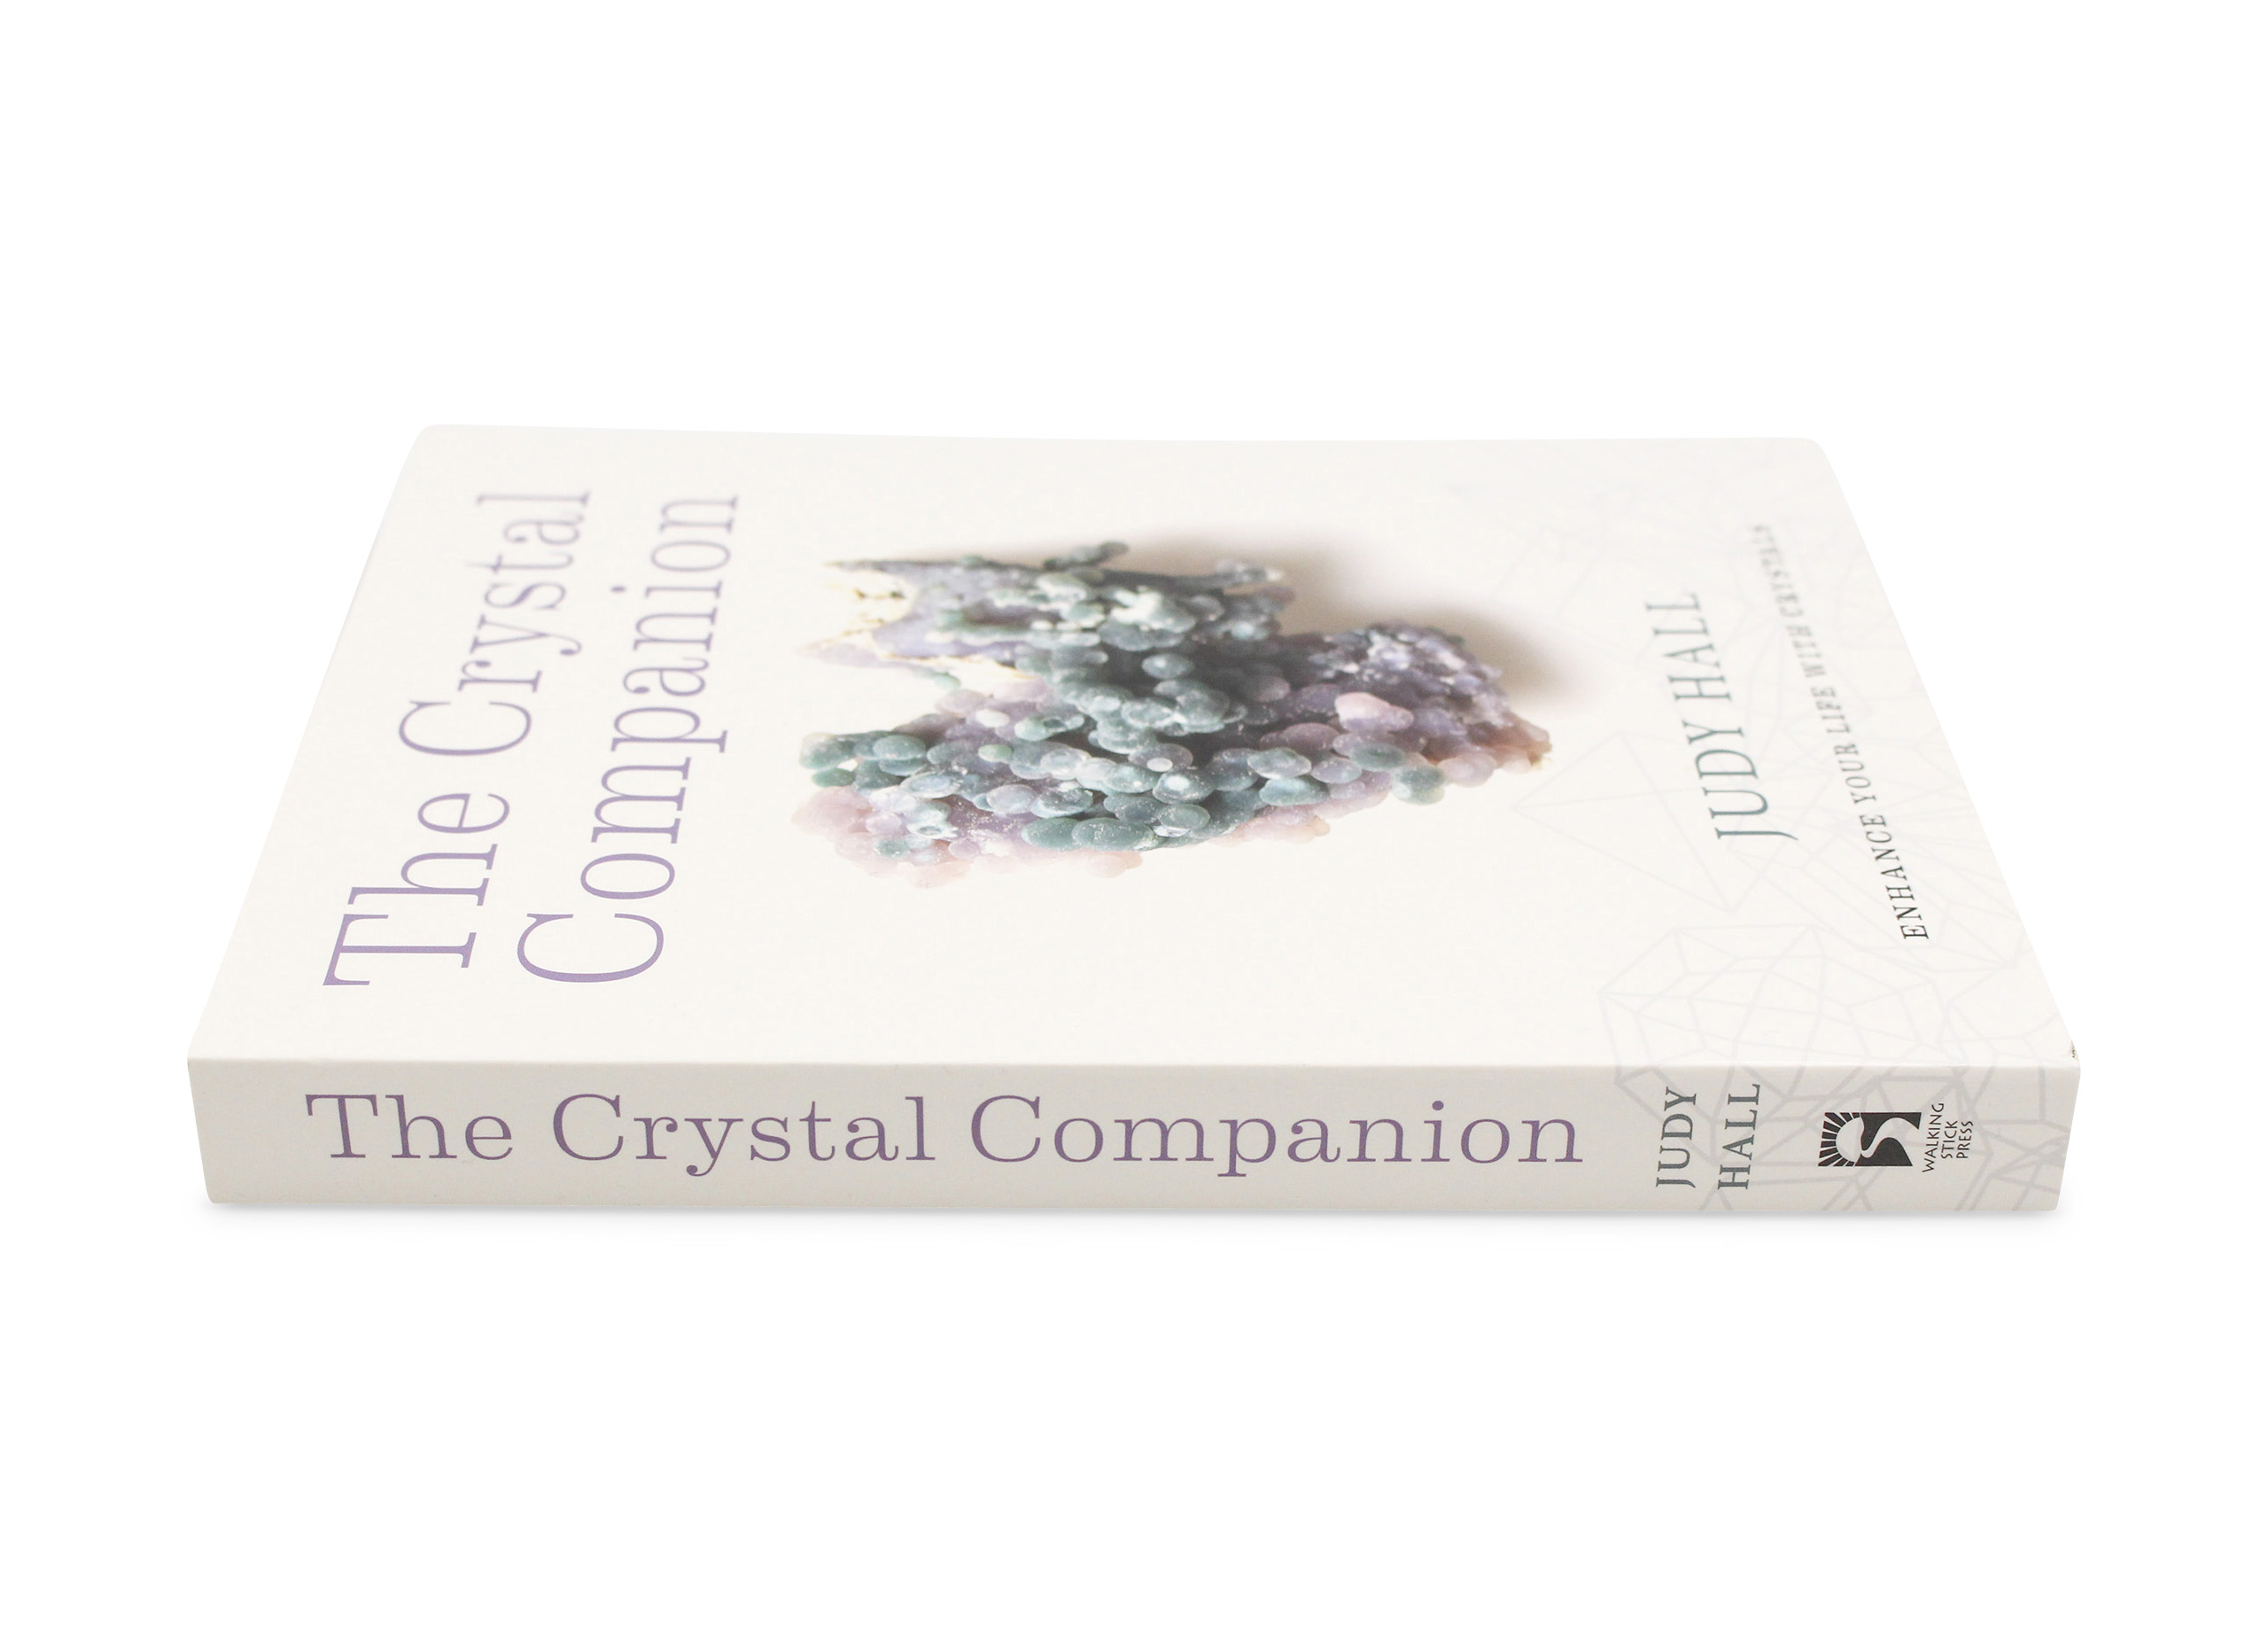 The Crystal Companion By Juy Hall - Crsytal Dreams